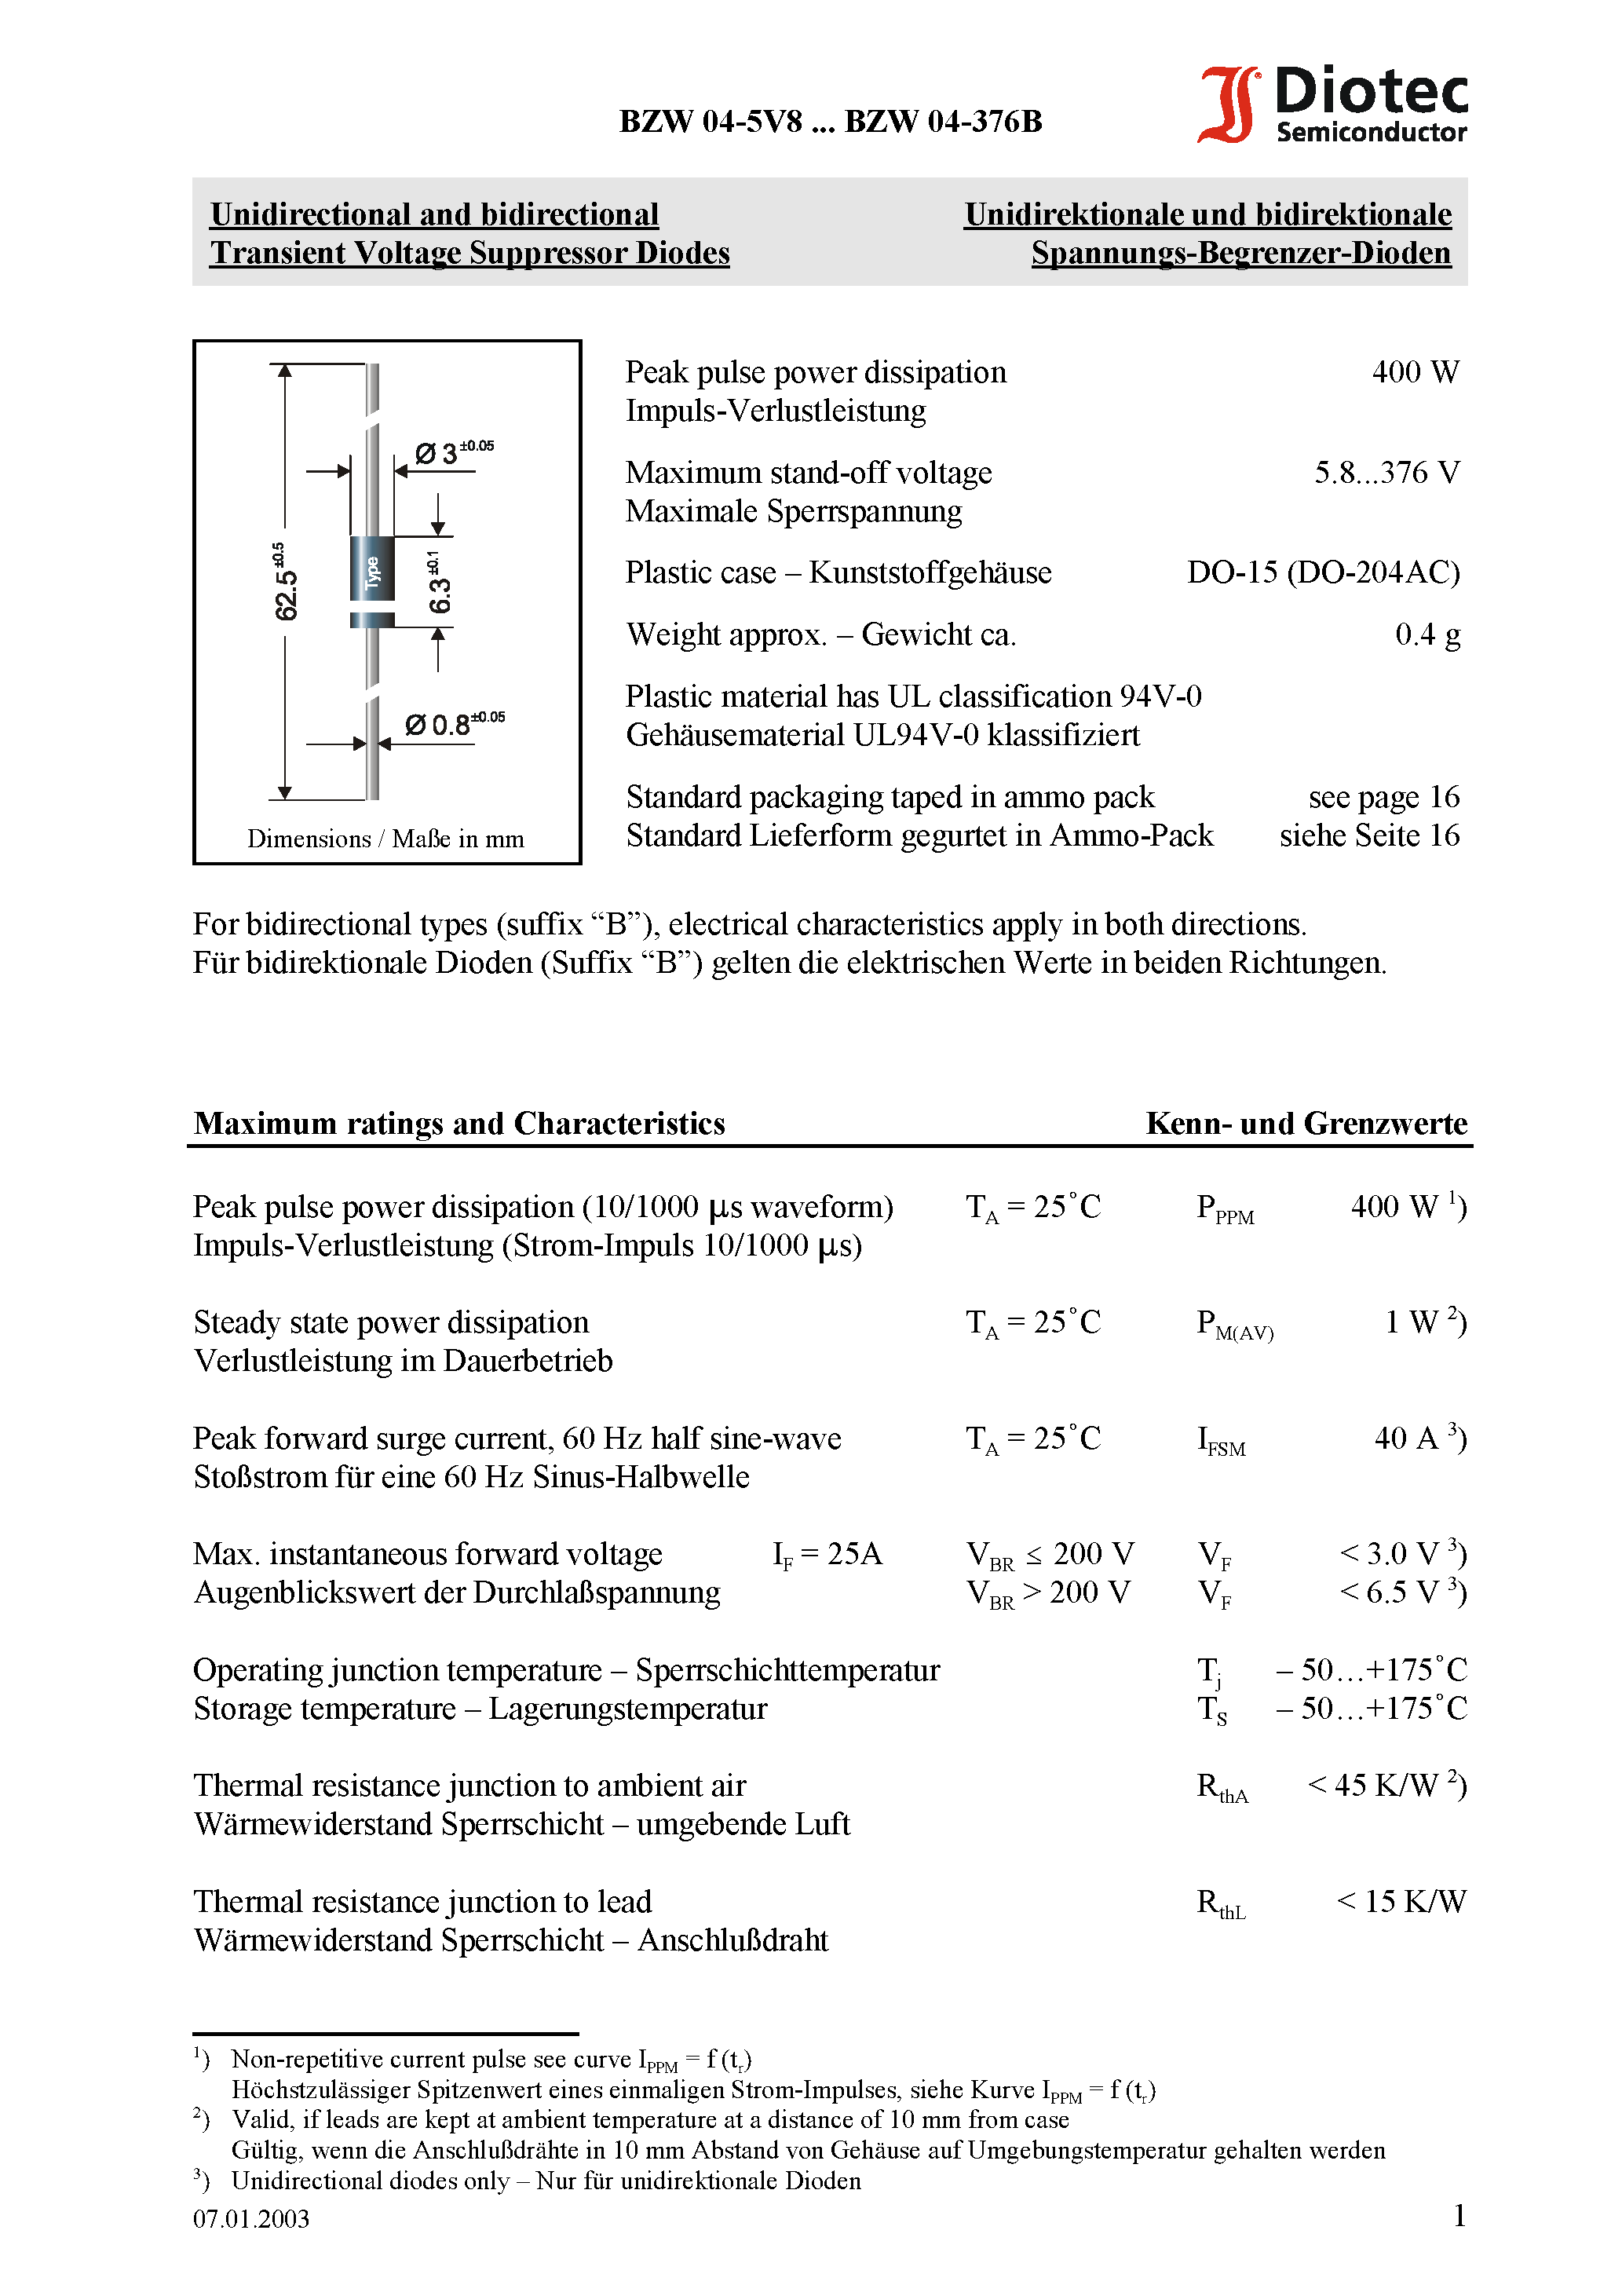 Datasheet BZW04-17 - Unidirectional and bidirectional Transient Voltage Suppressor Diodes page 1